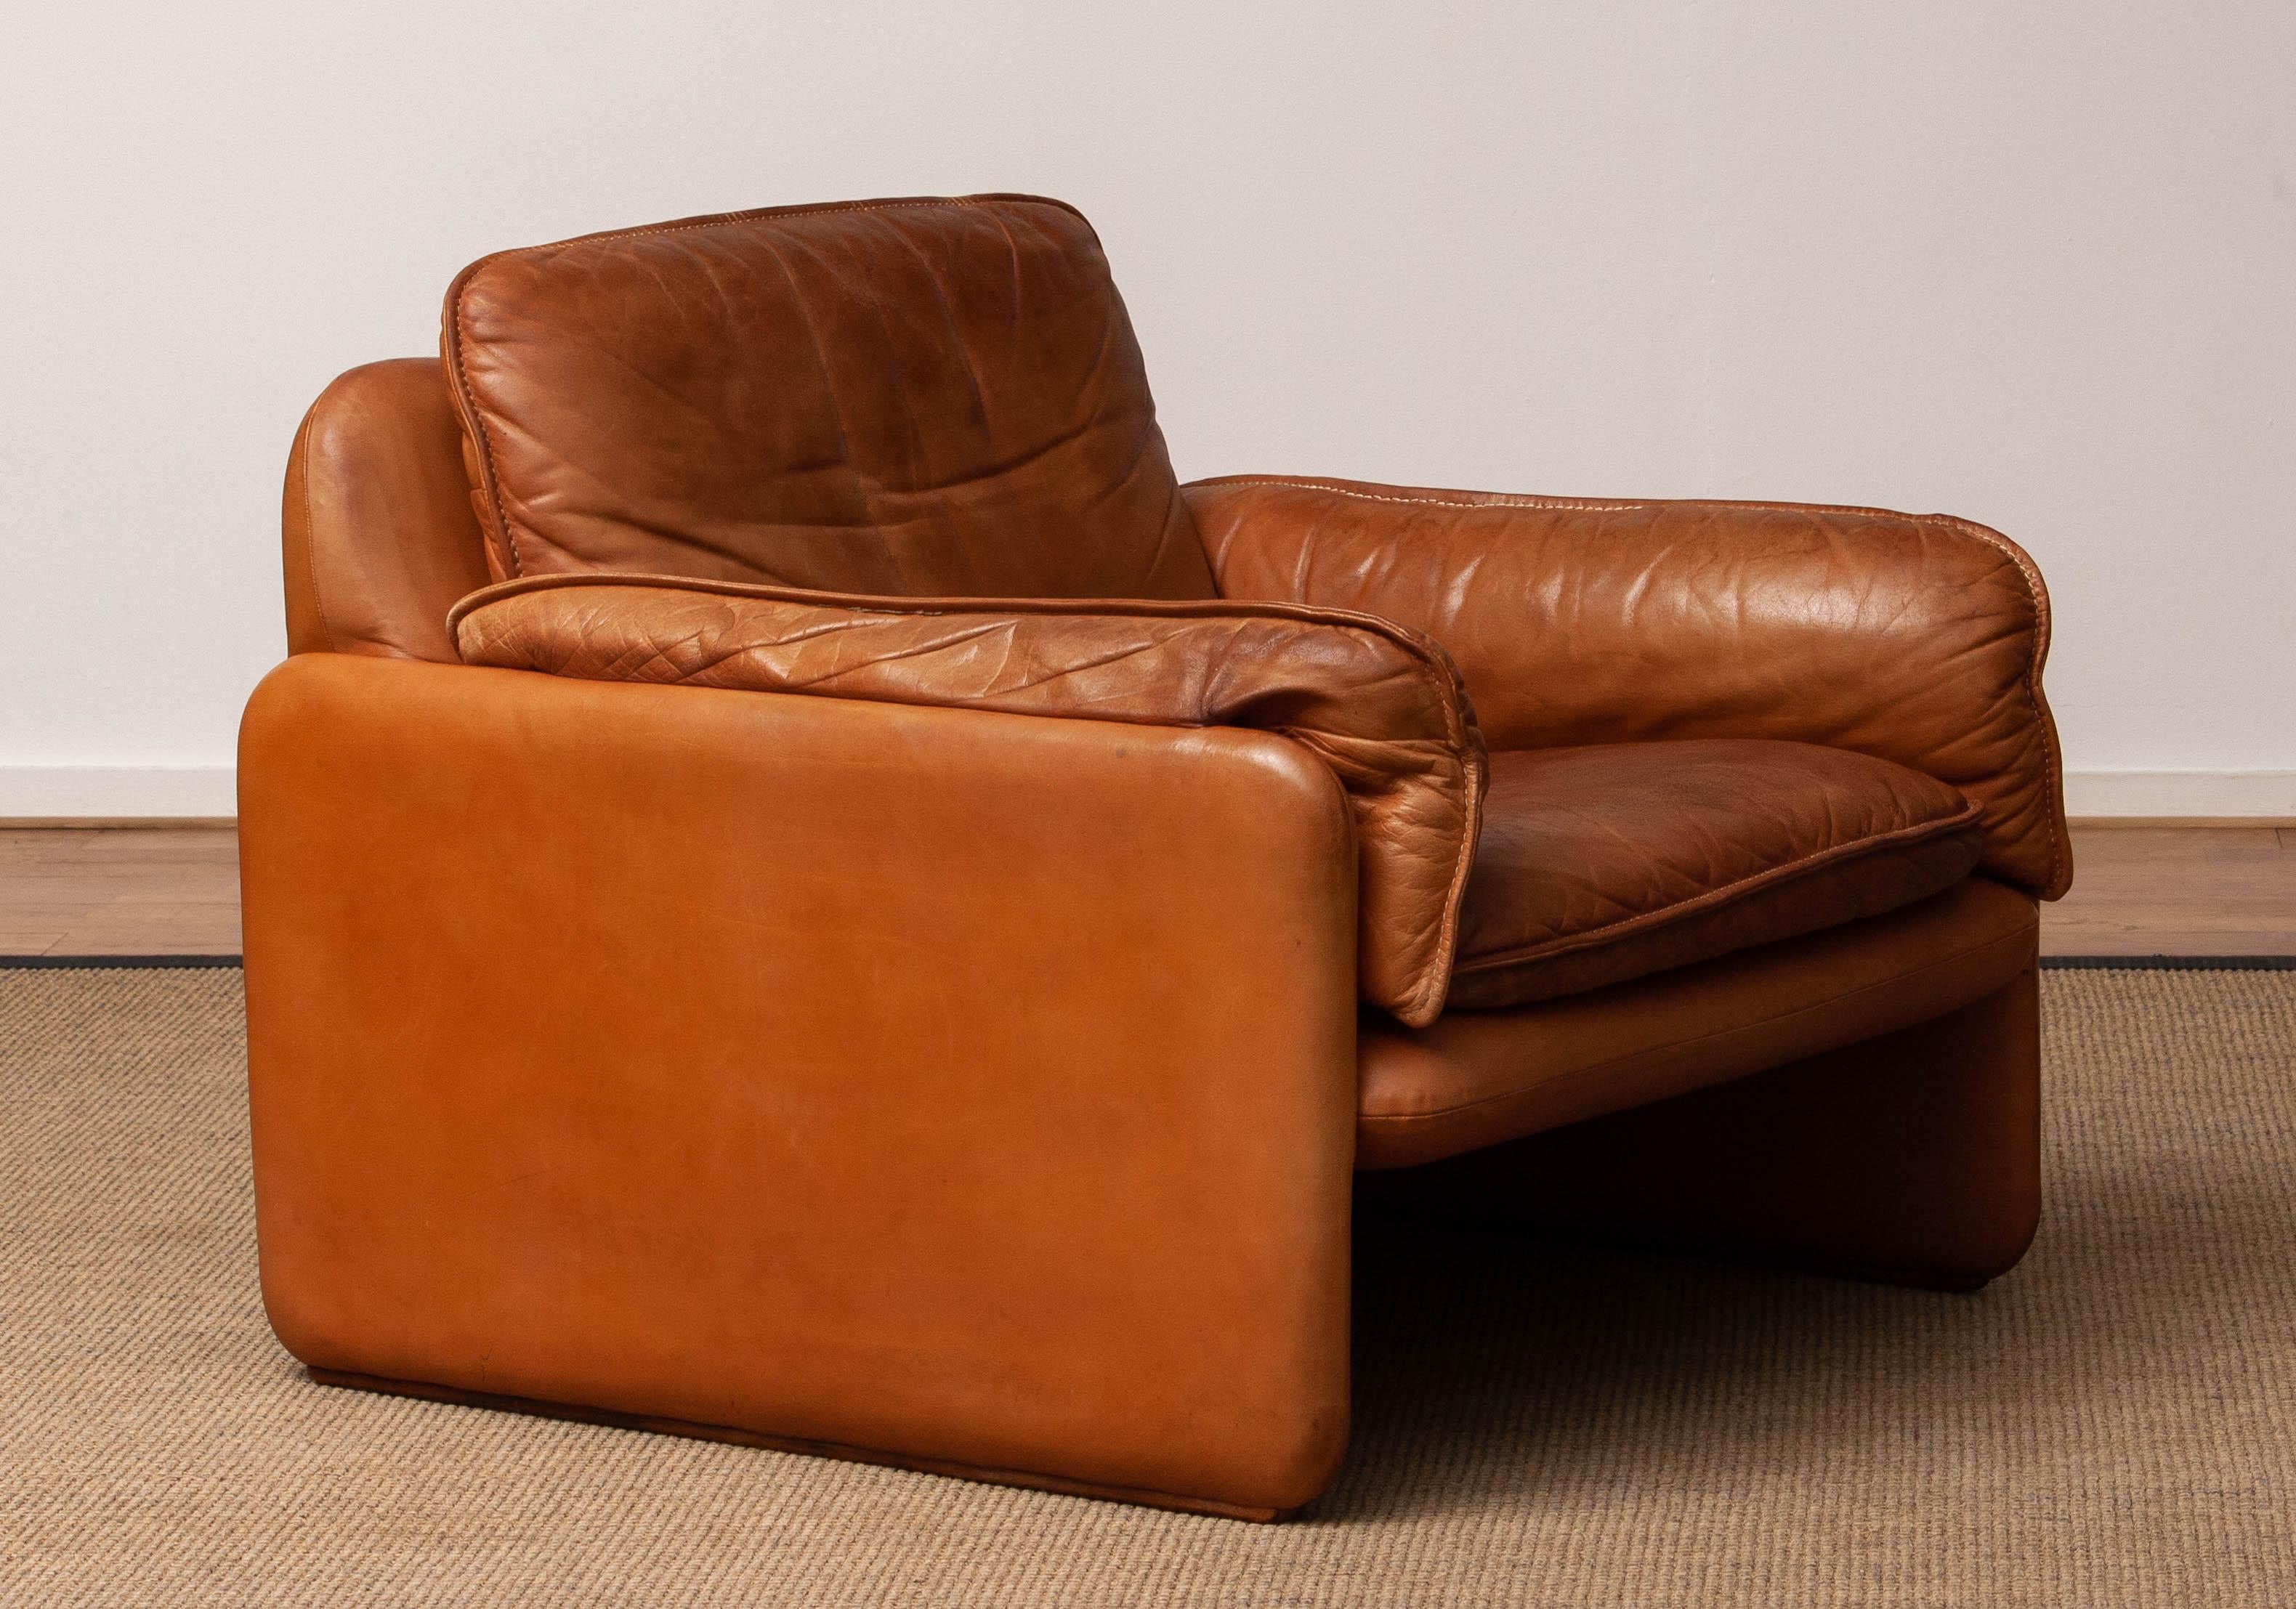 Beautiful DS-61 in cognac / nature color leather by 'De Sede' Switzerland from the 1960's with beautiful patina and in allover good condition. This lounge chair supports great and is an absolutely eye catcher in your interior.